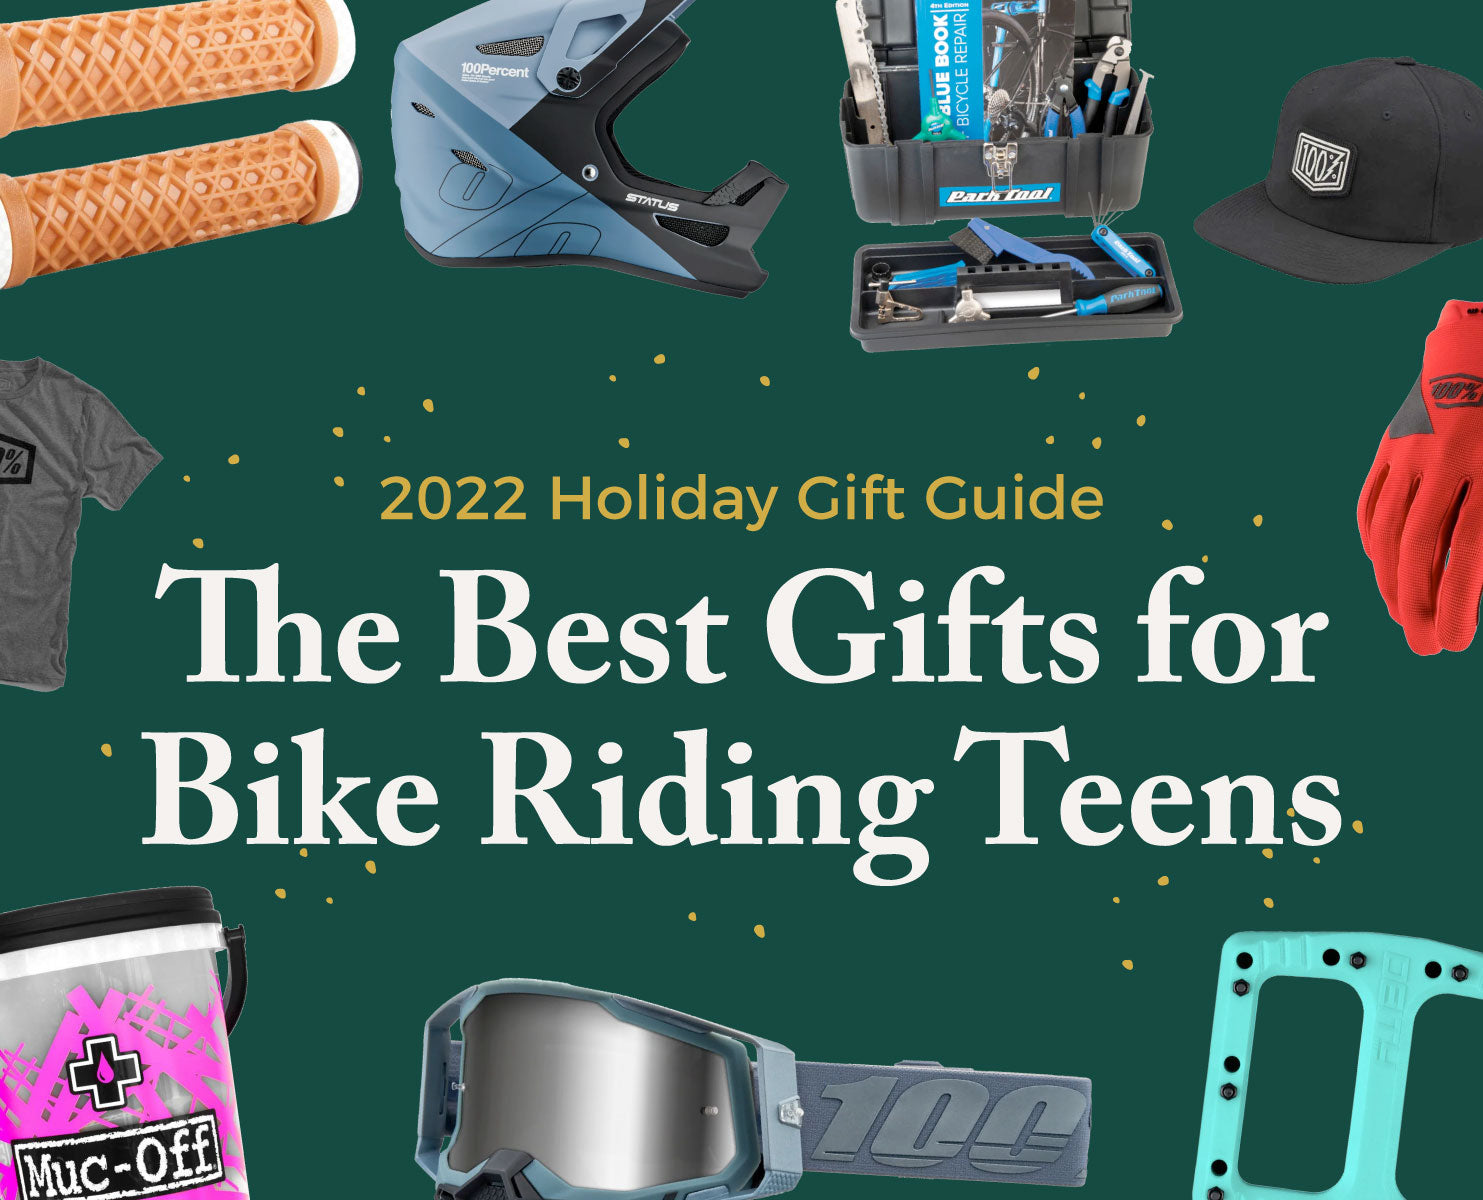 The Best Gifts for Bike Riding Teens